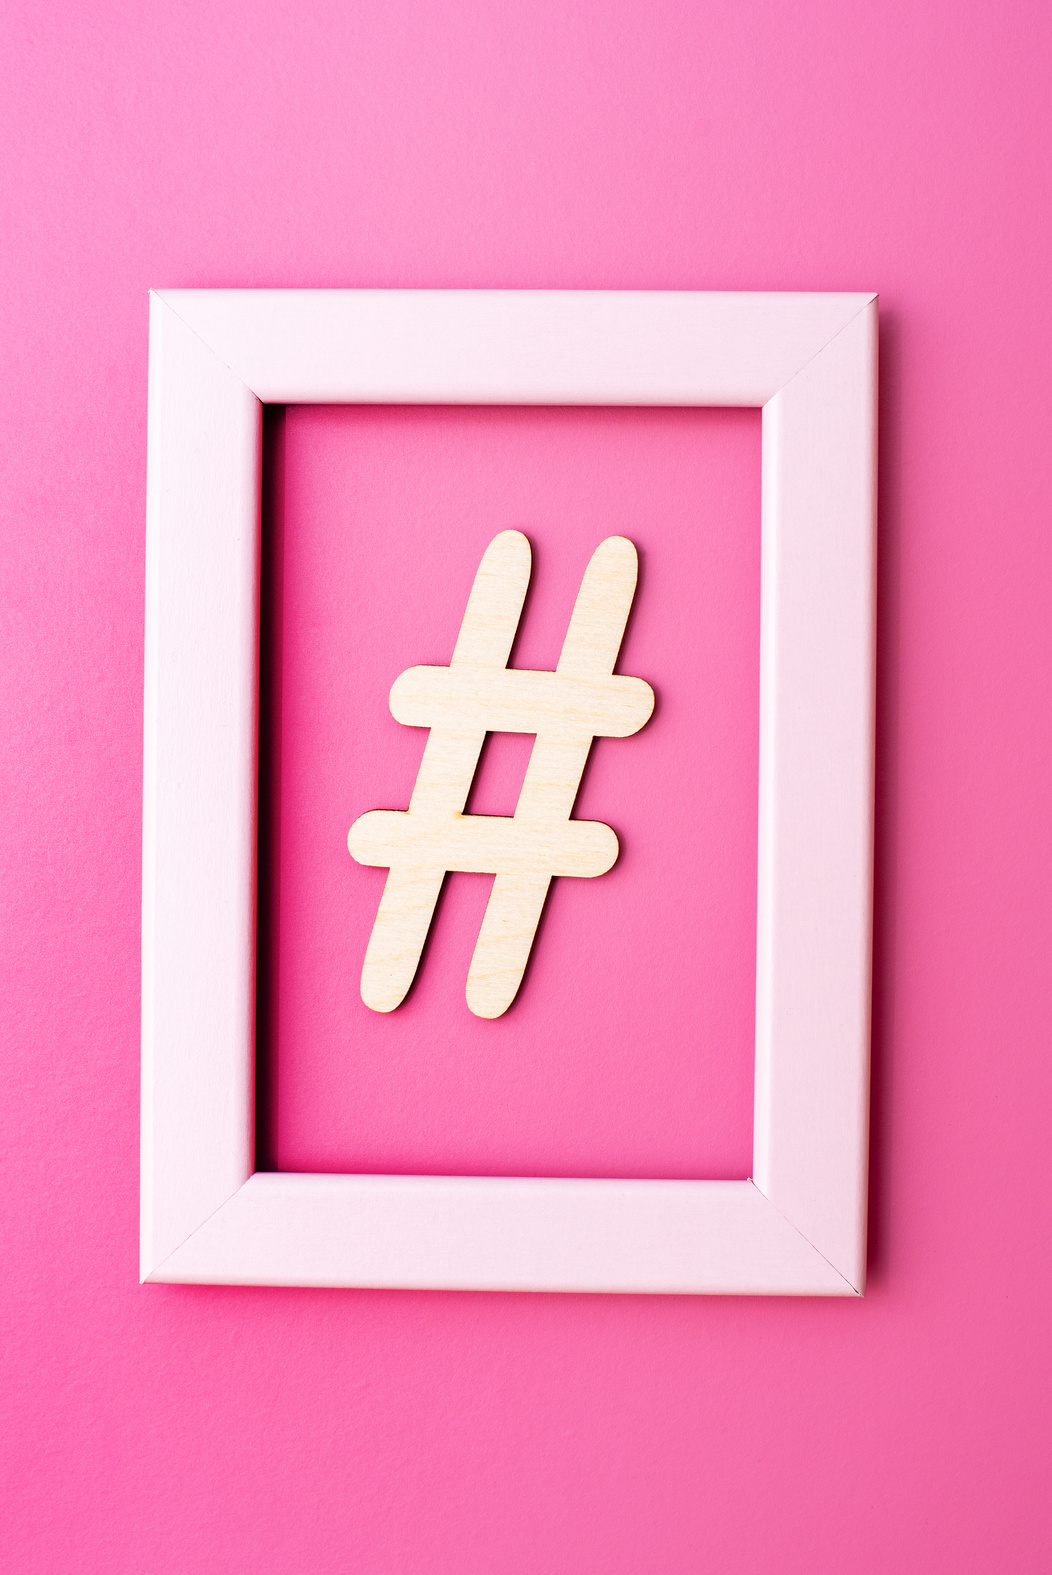 Hashtag sign made of wooden material in frame on pink background